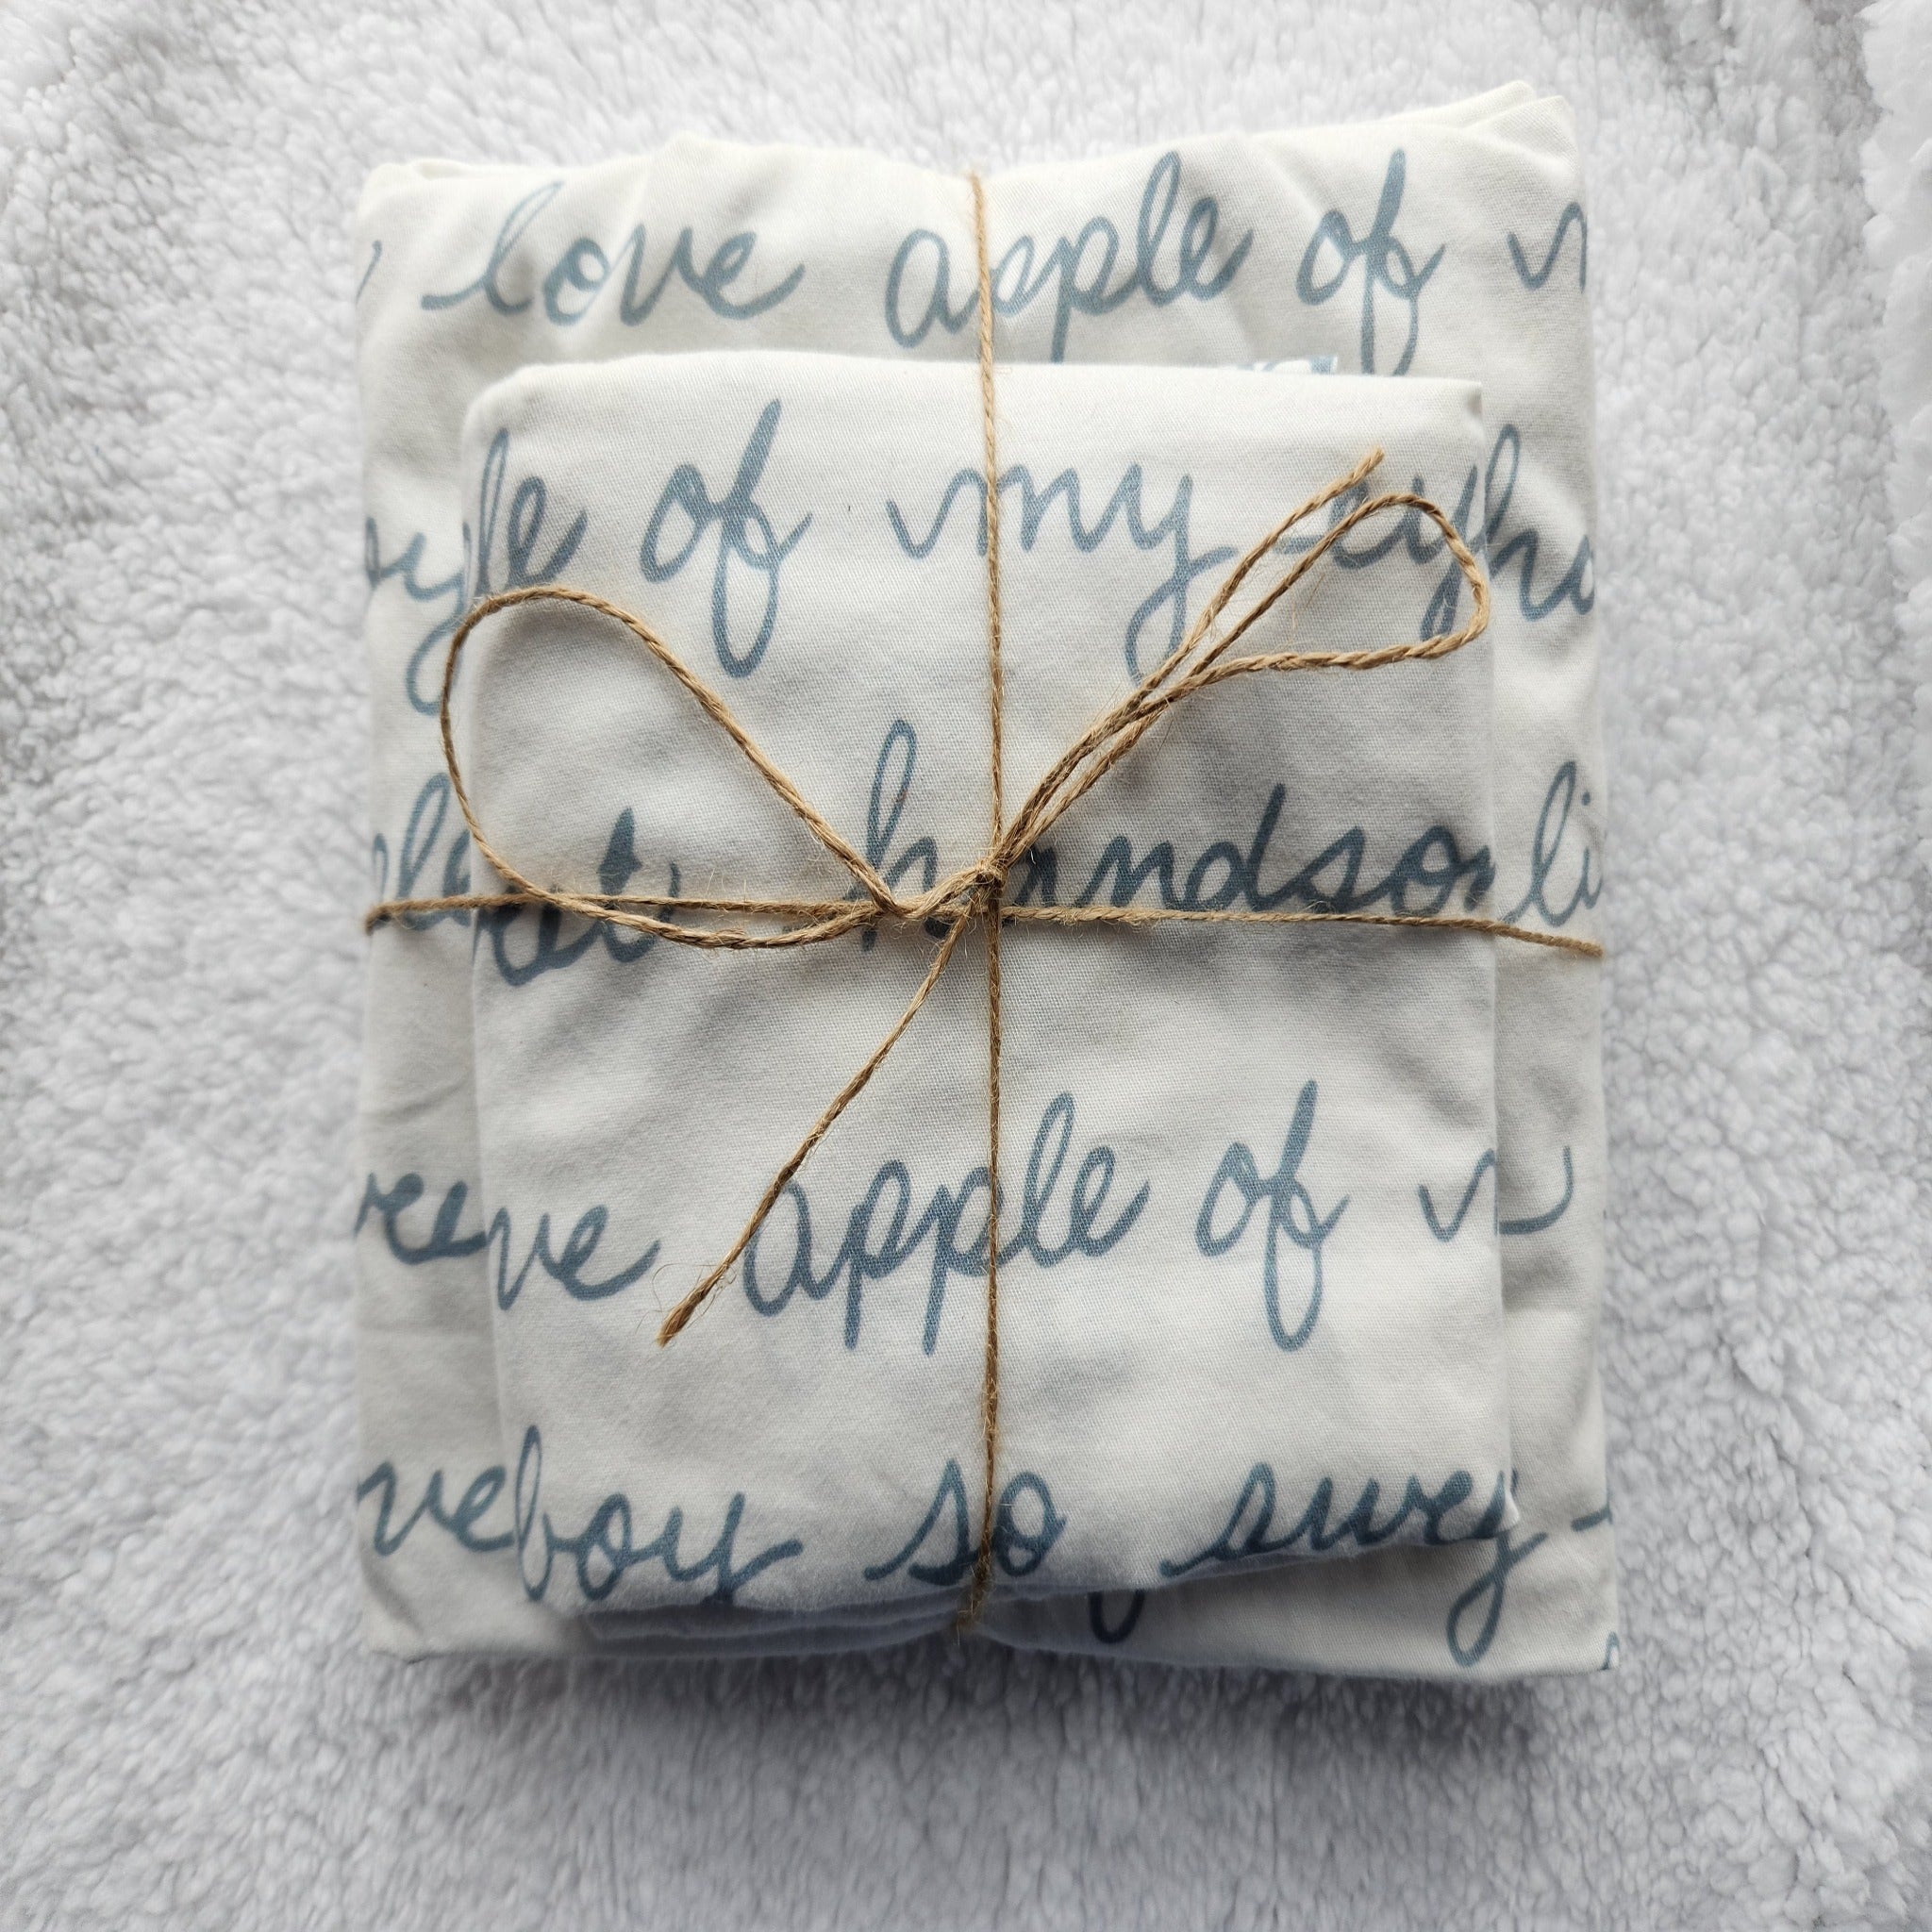 Organic Sweet Words for a Baby Boy Crib Sheet+Changing Pad Cover Set - MookyPookyandMuffin